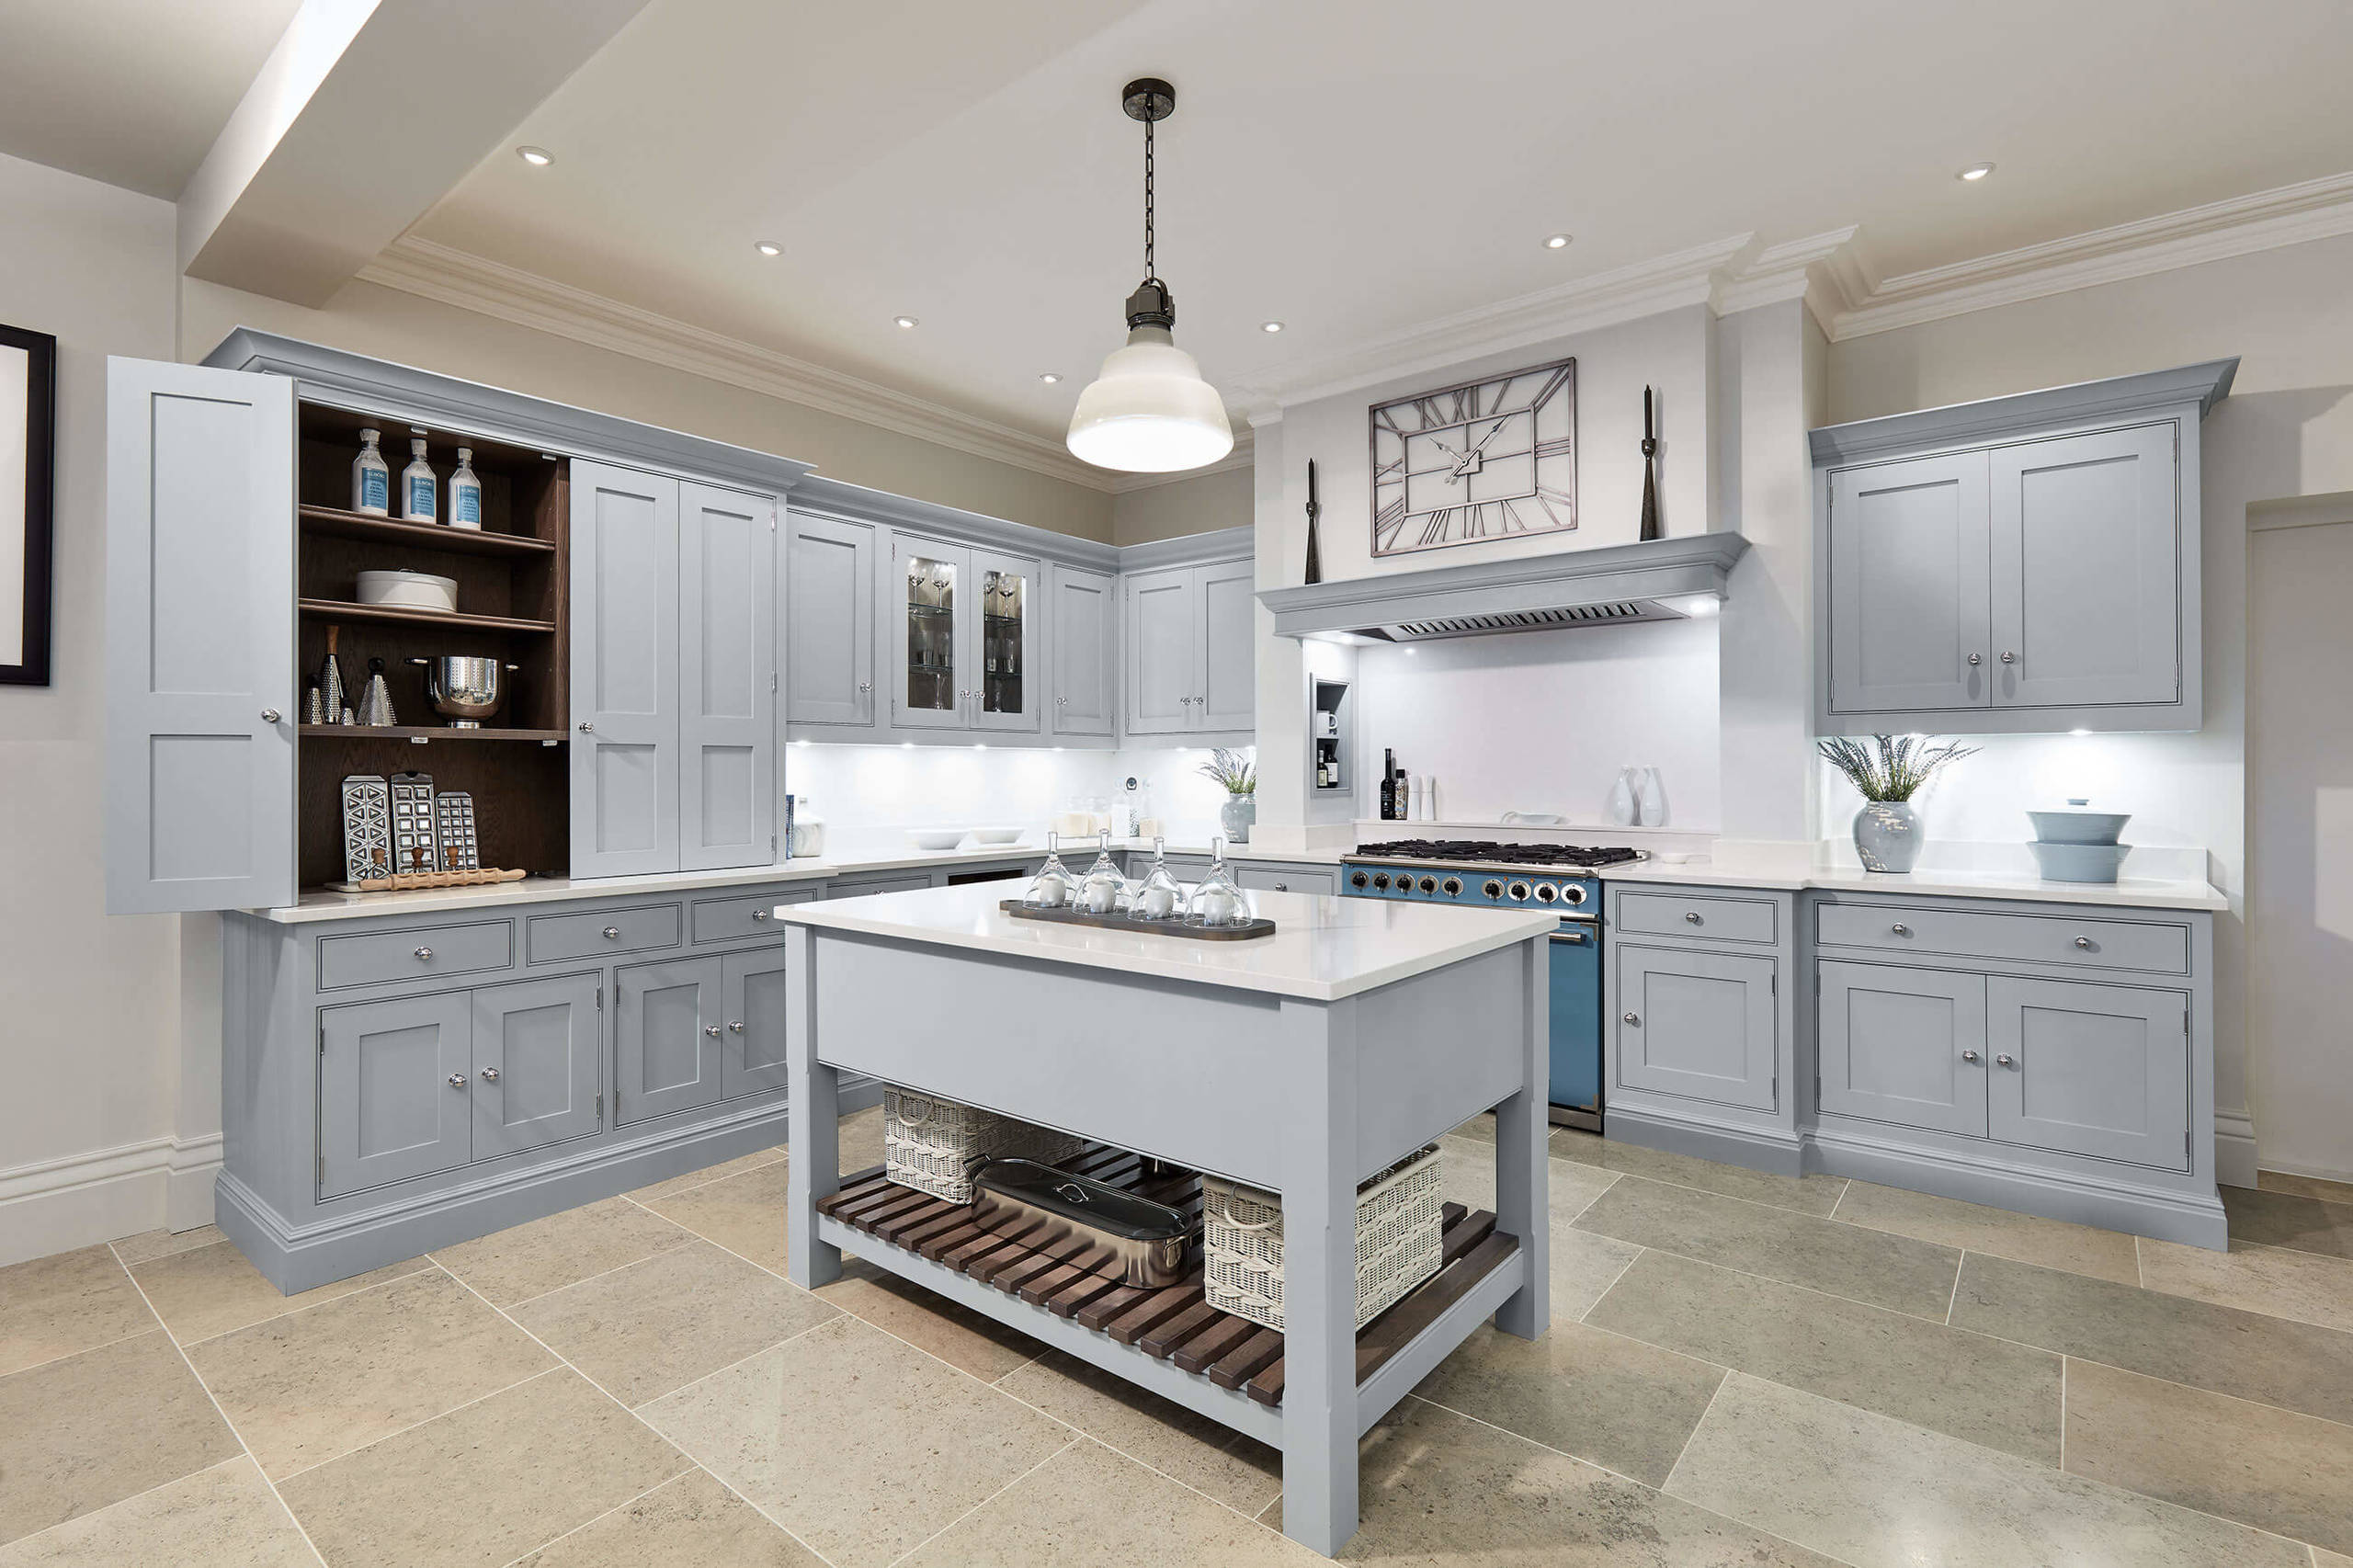 https://st.hzcdn.com/simgs/pictures/kitchens/light-blue-kitchen-tom-howley-img~8ad19c270aafe41c_14-0354-1-a2aa912.jpg